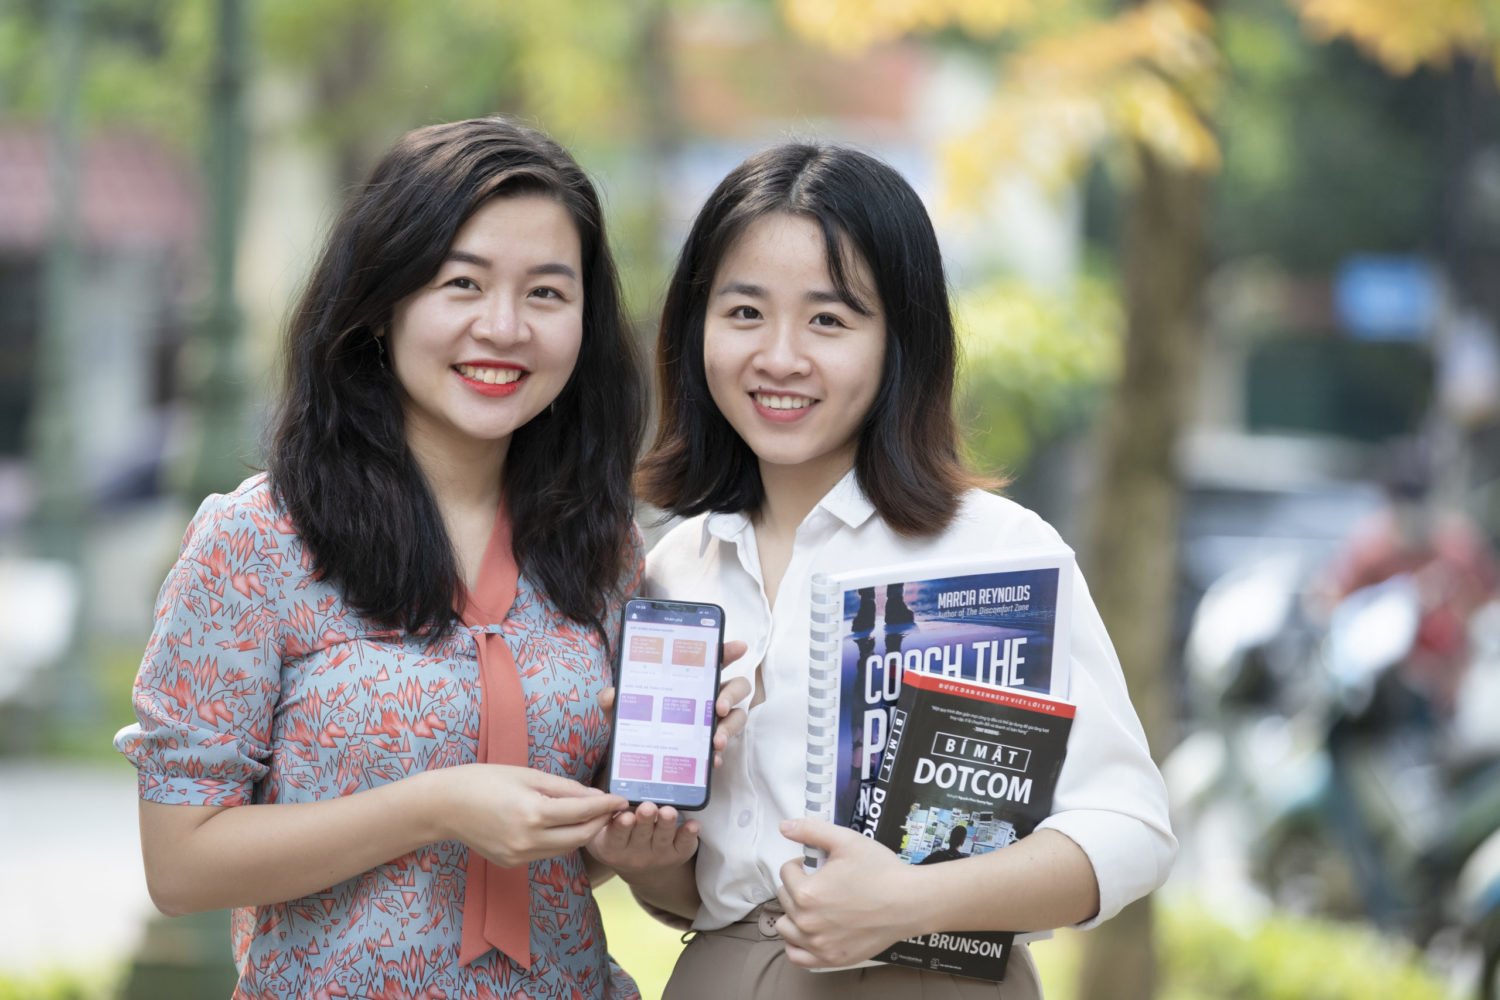 Quynh Nguyen, founder of AZCare, and WEAVE alumna poses with the HerVenture app and a colleague